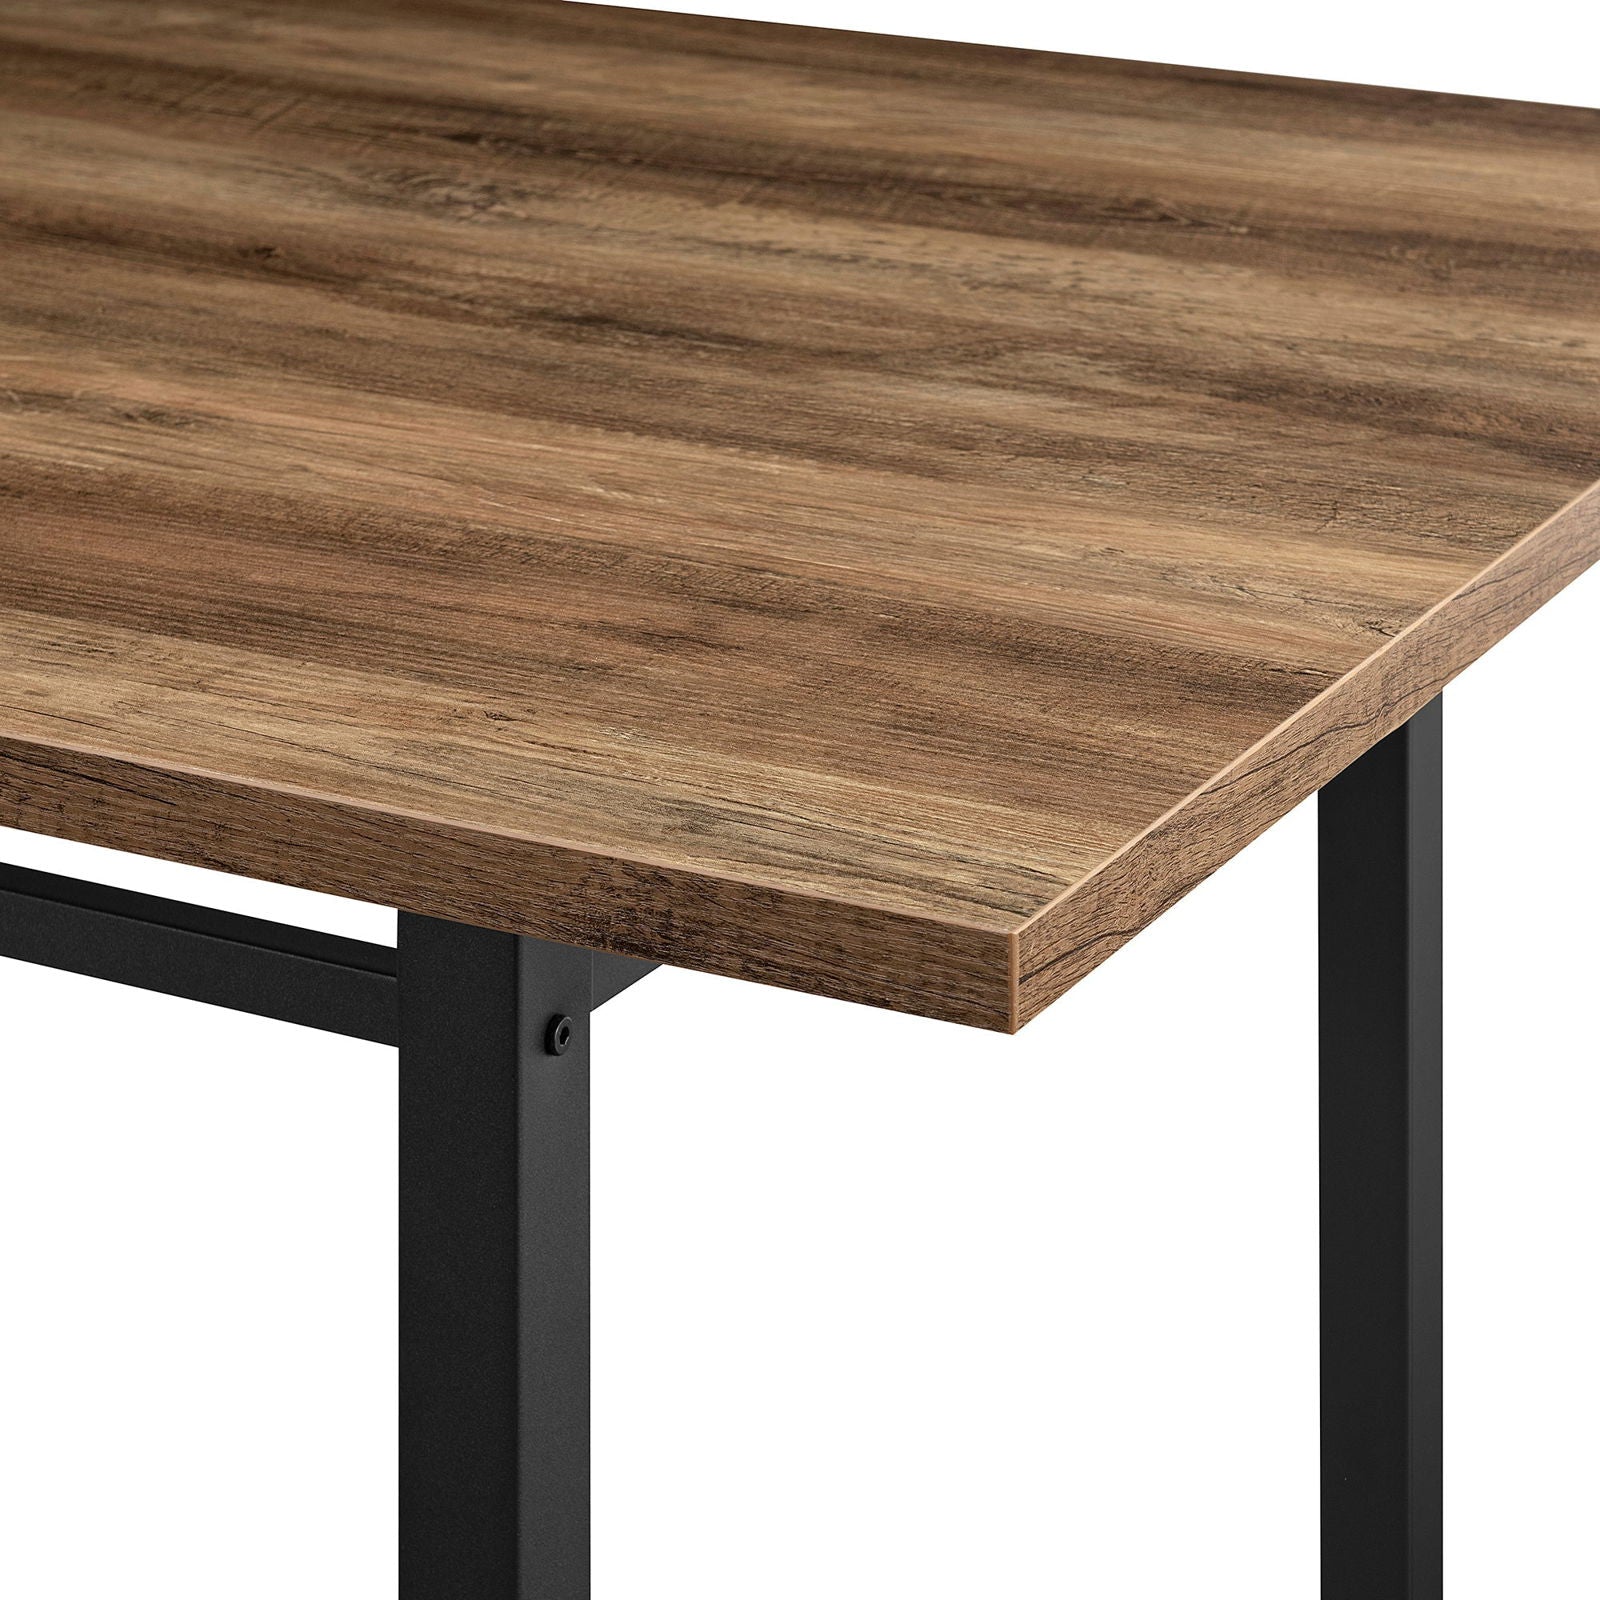 60" Contemporary Wood and Metal Dining Table - Mac & Mabel